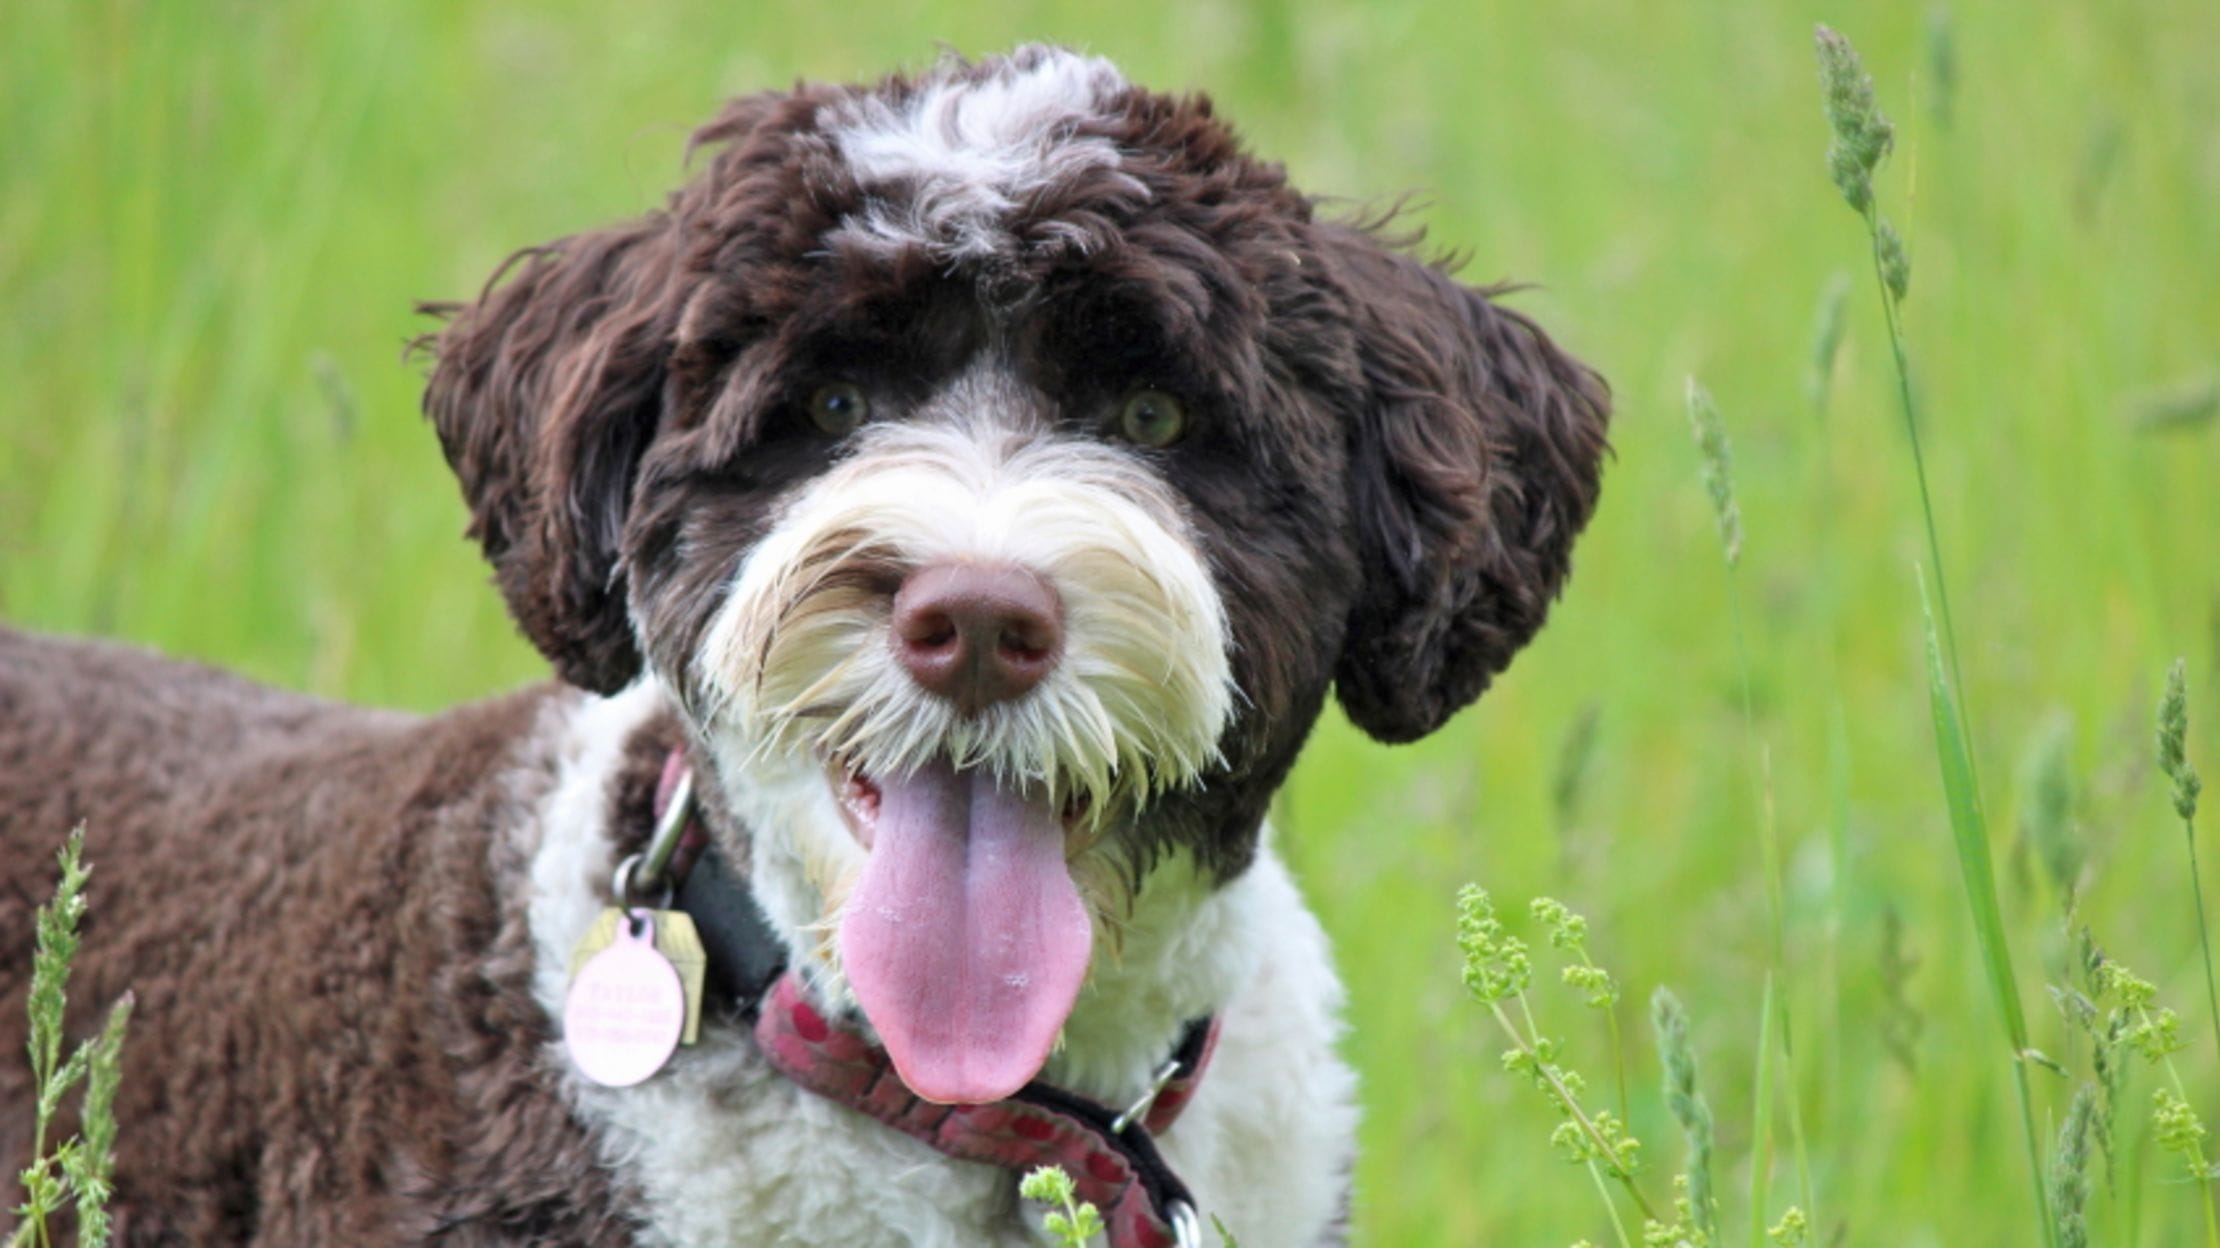 Portuguese water dogs